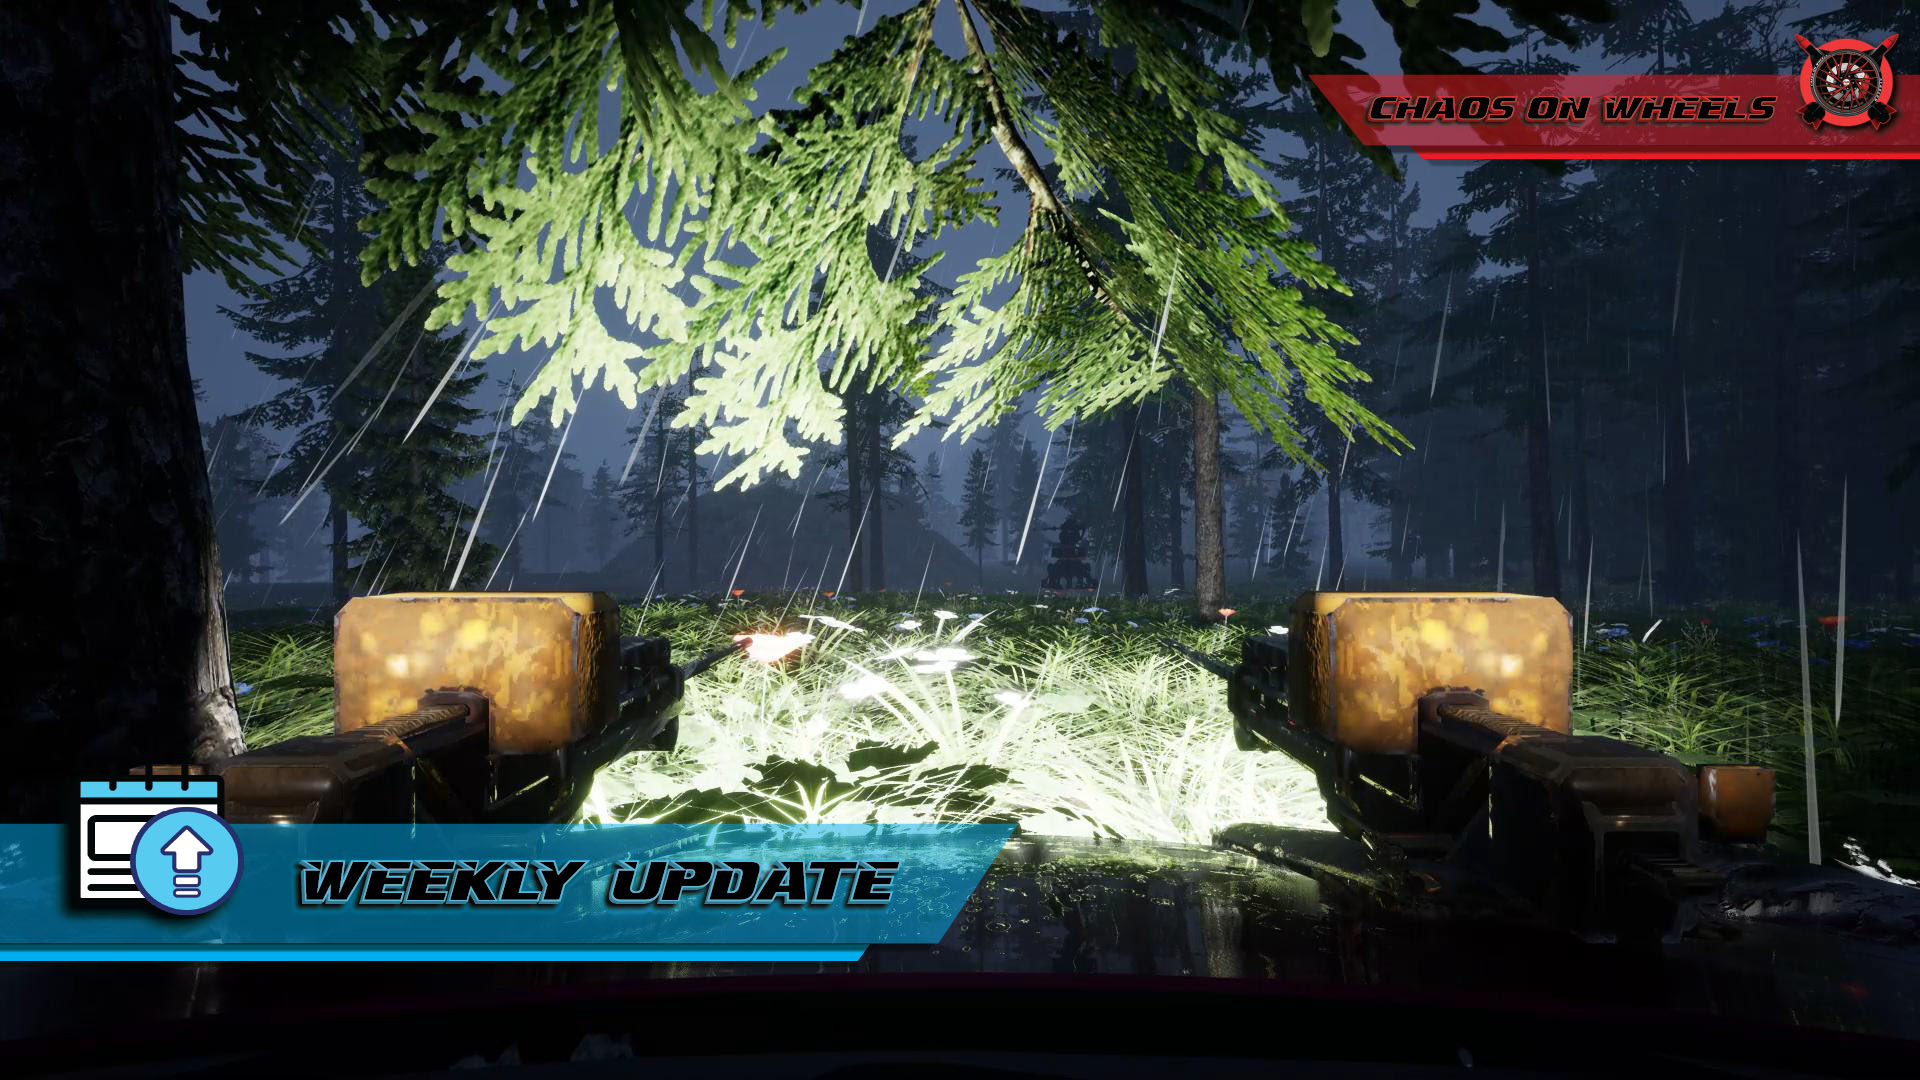 Weekly update – New camera angles